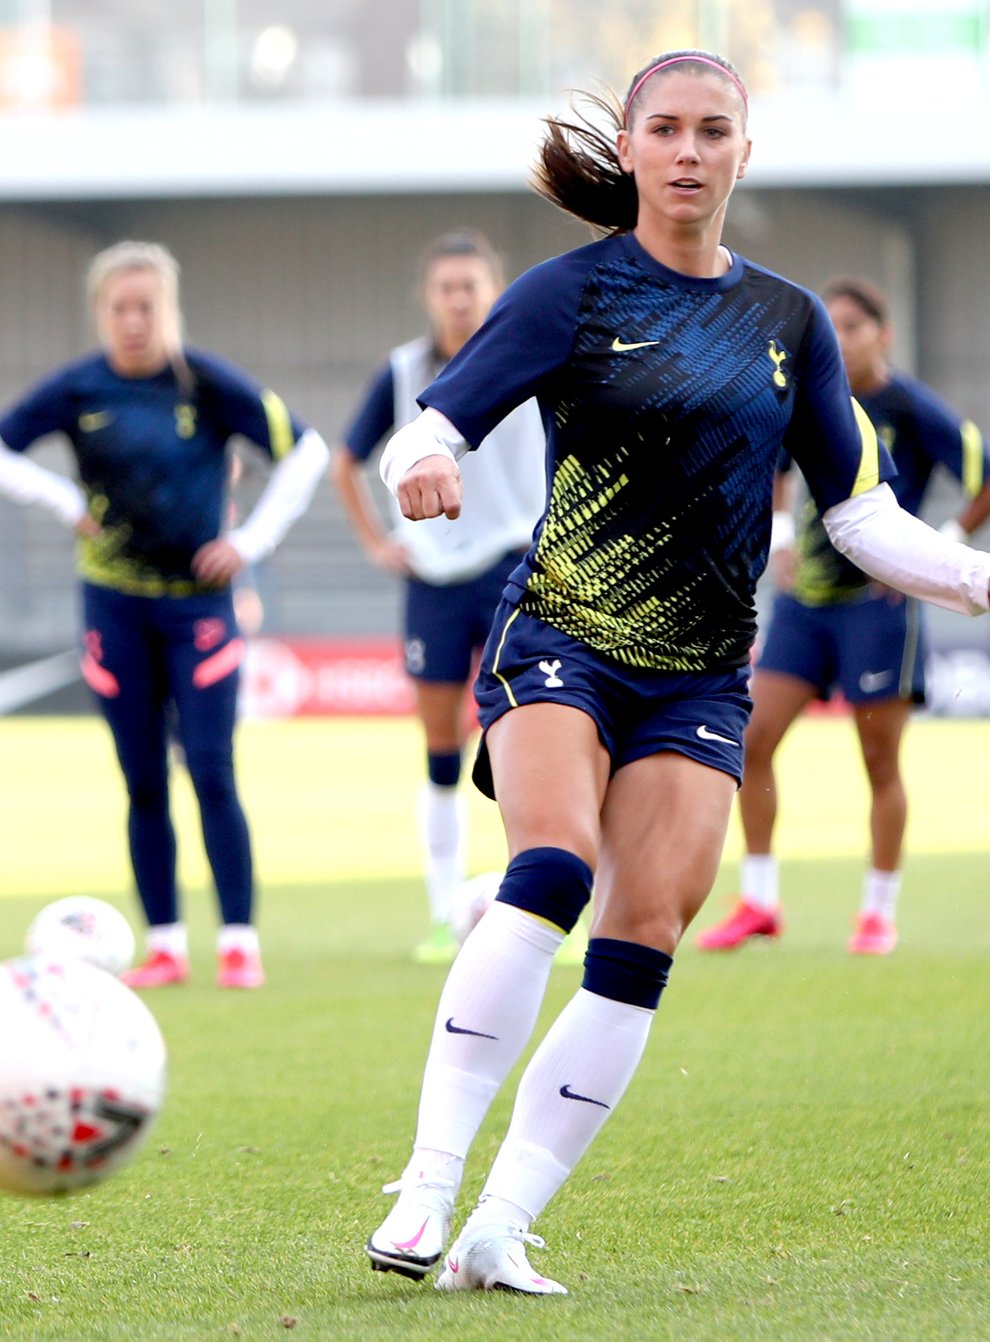 Morgan is set to make her debut for Spurs